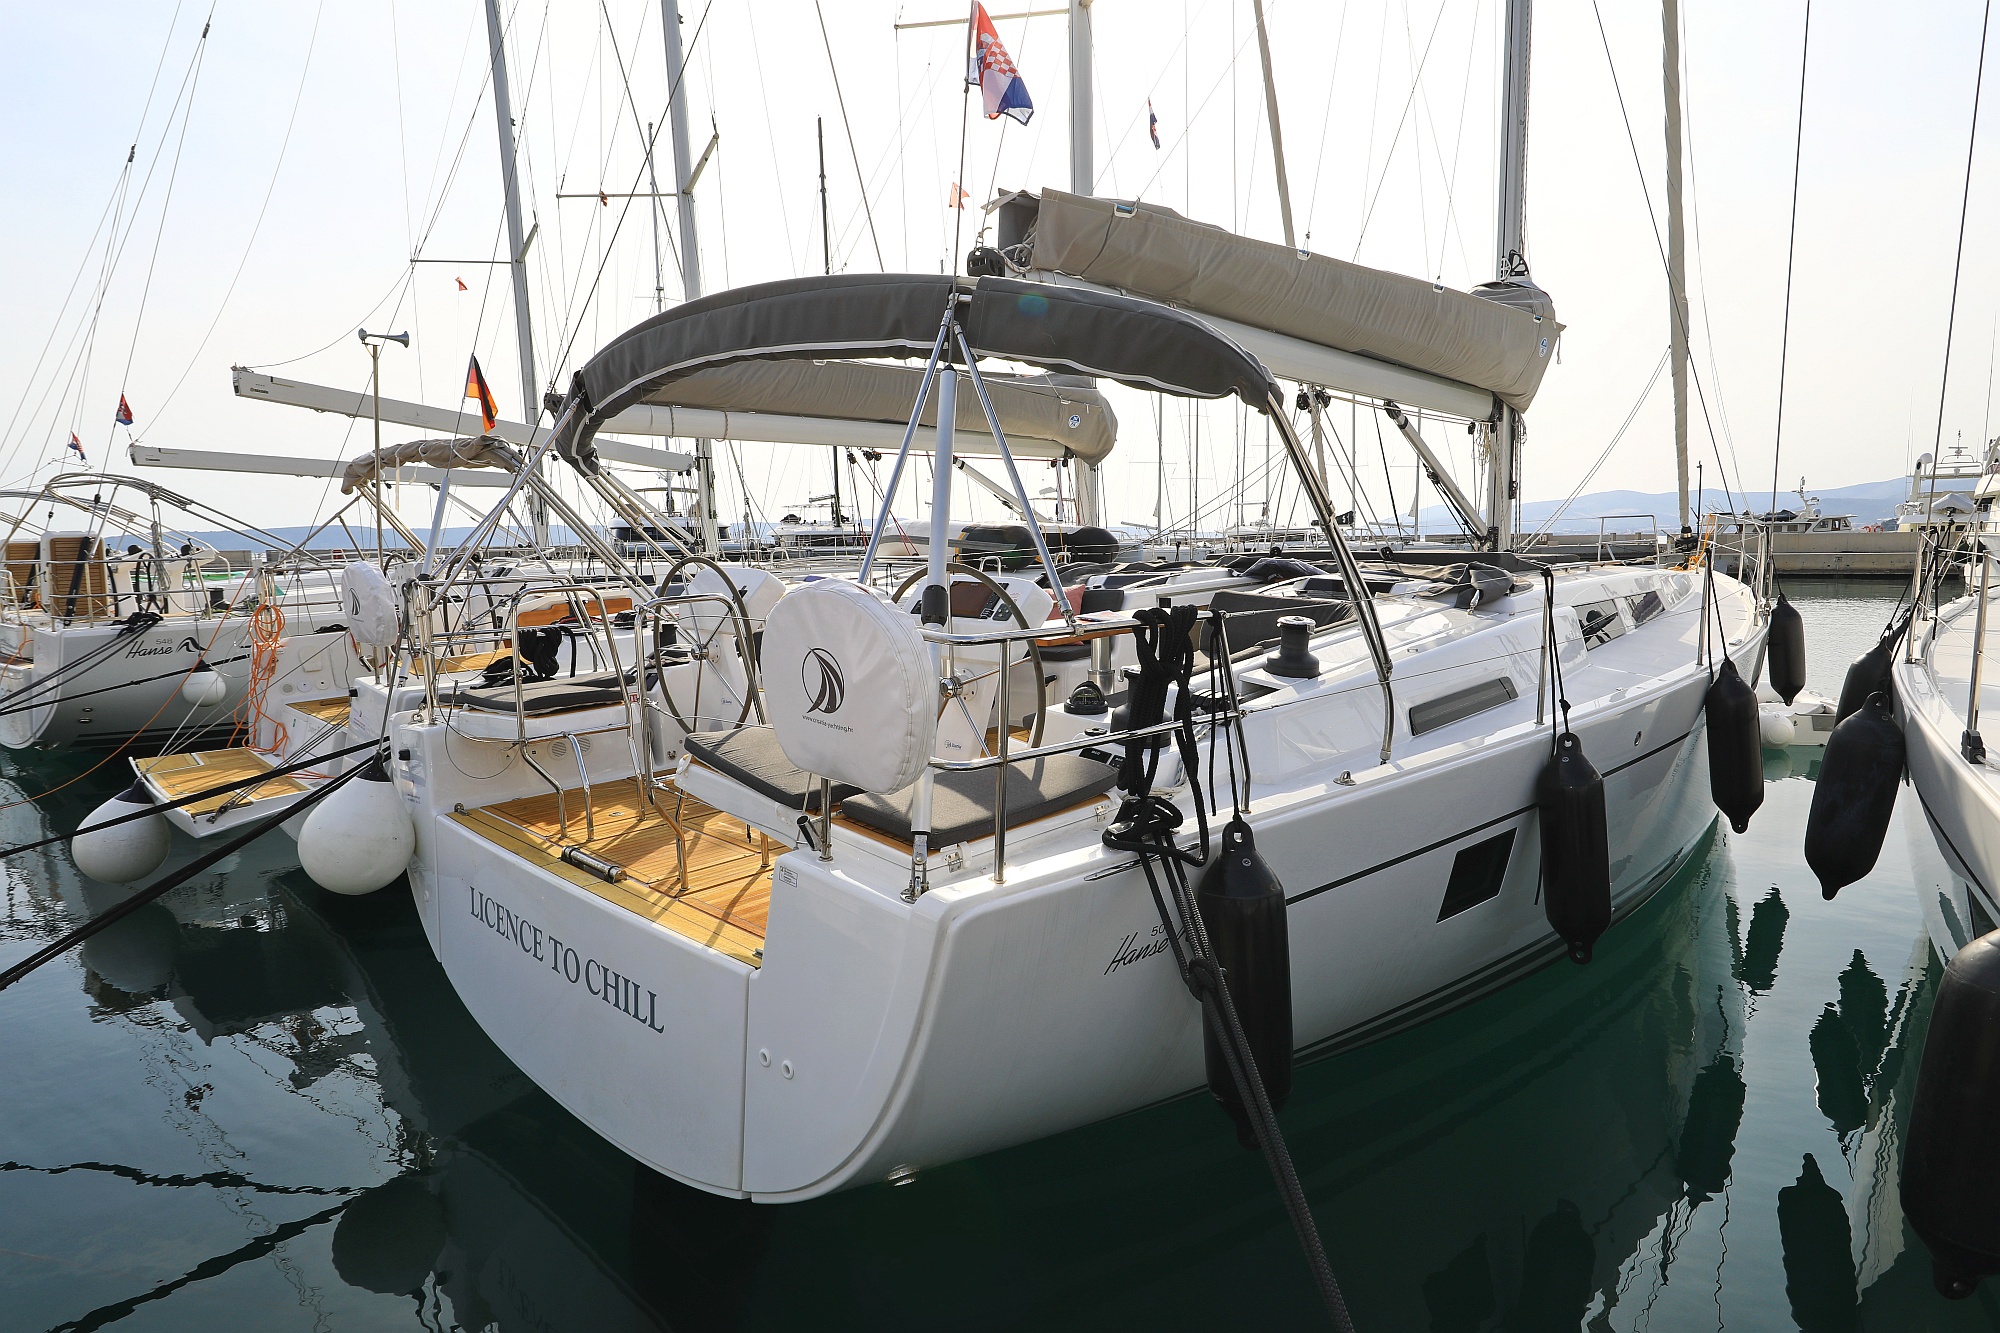 Hanse 508 – 5 + 1 cab. – License to Chill